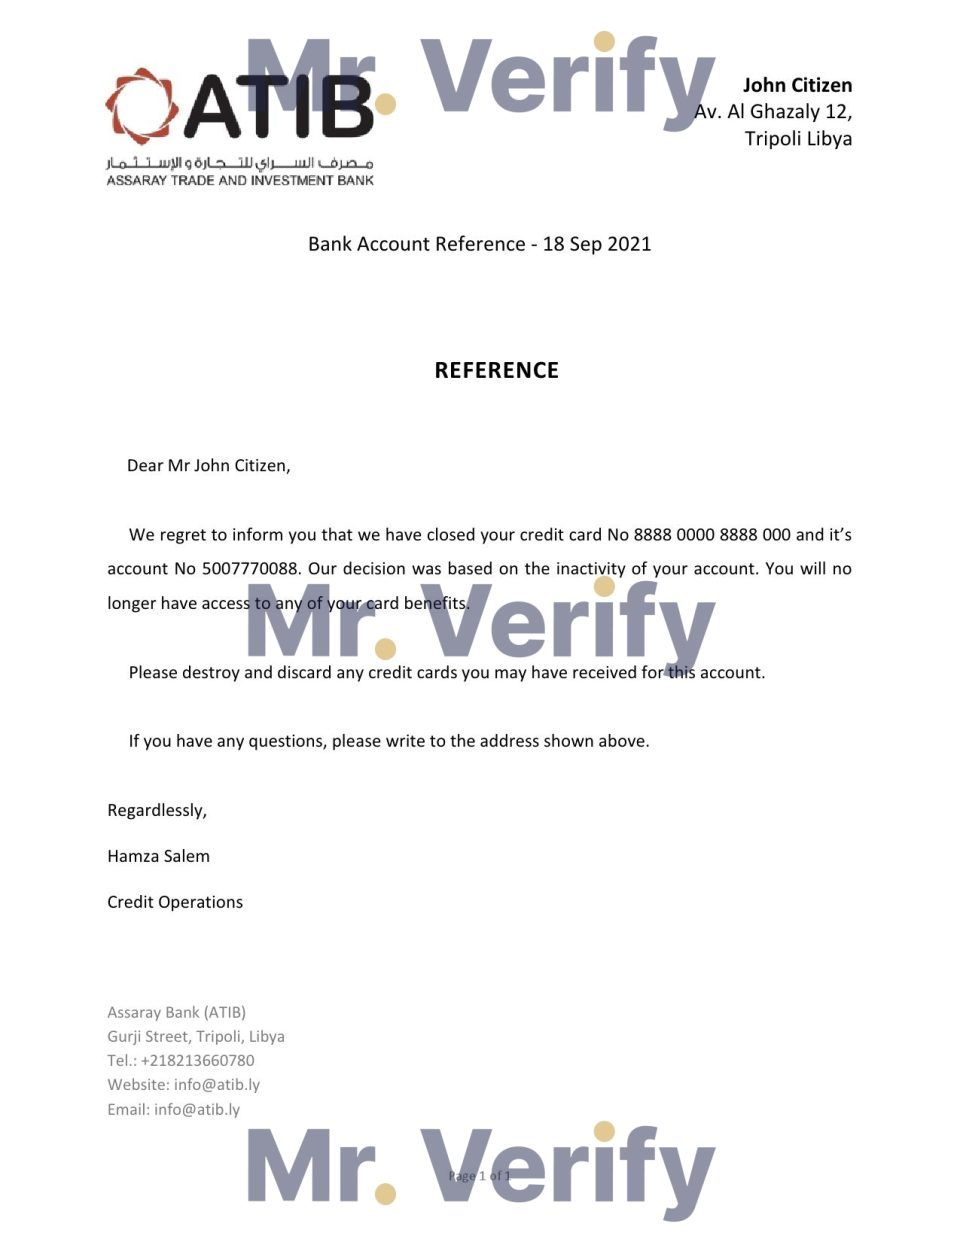 Download Libya Assaray Bank Reference Letter Templates | Editable Word